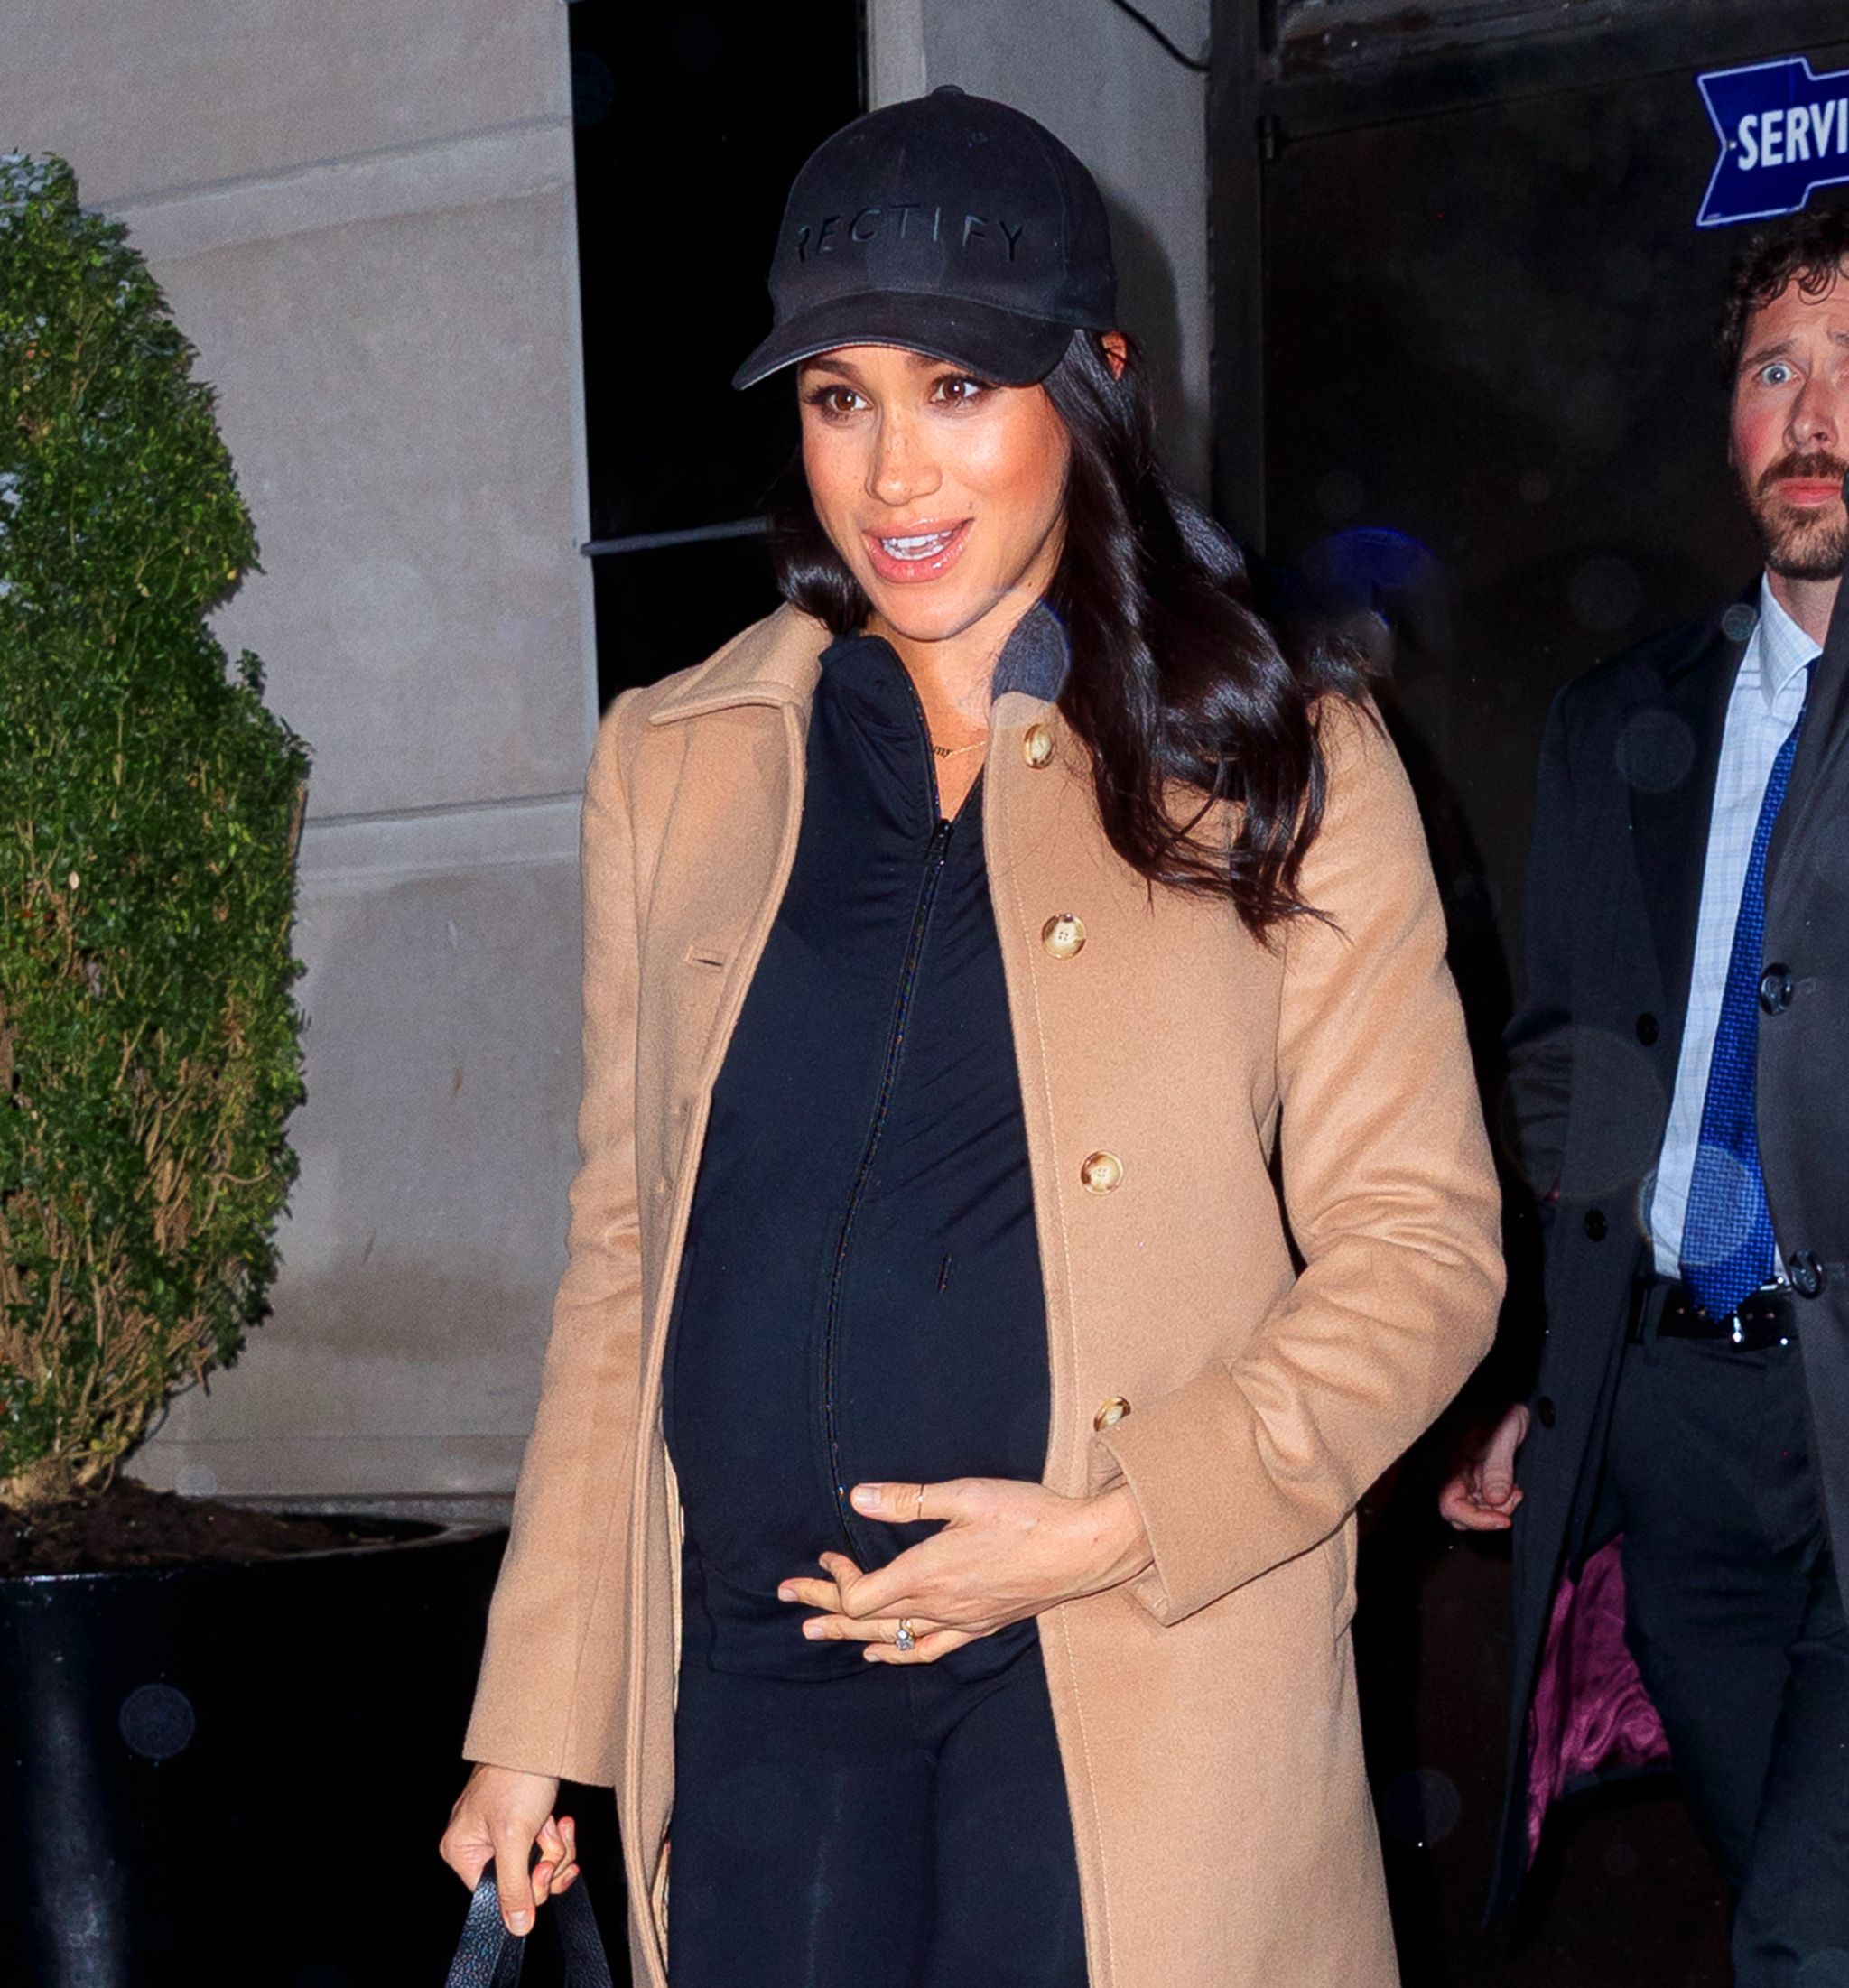 Meghan Markle Wears Mummy Necklace In New York For Her Baby Shower